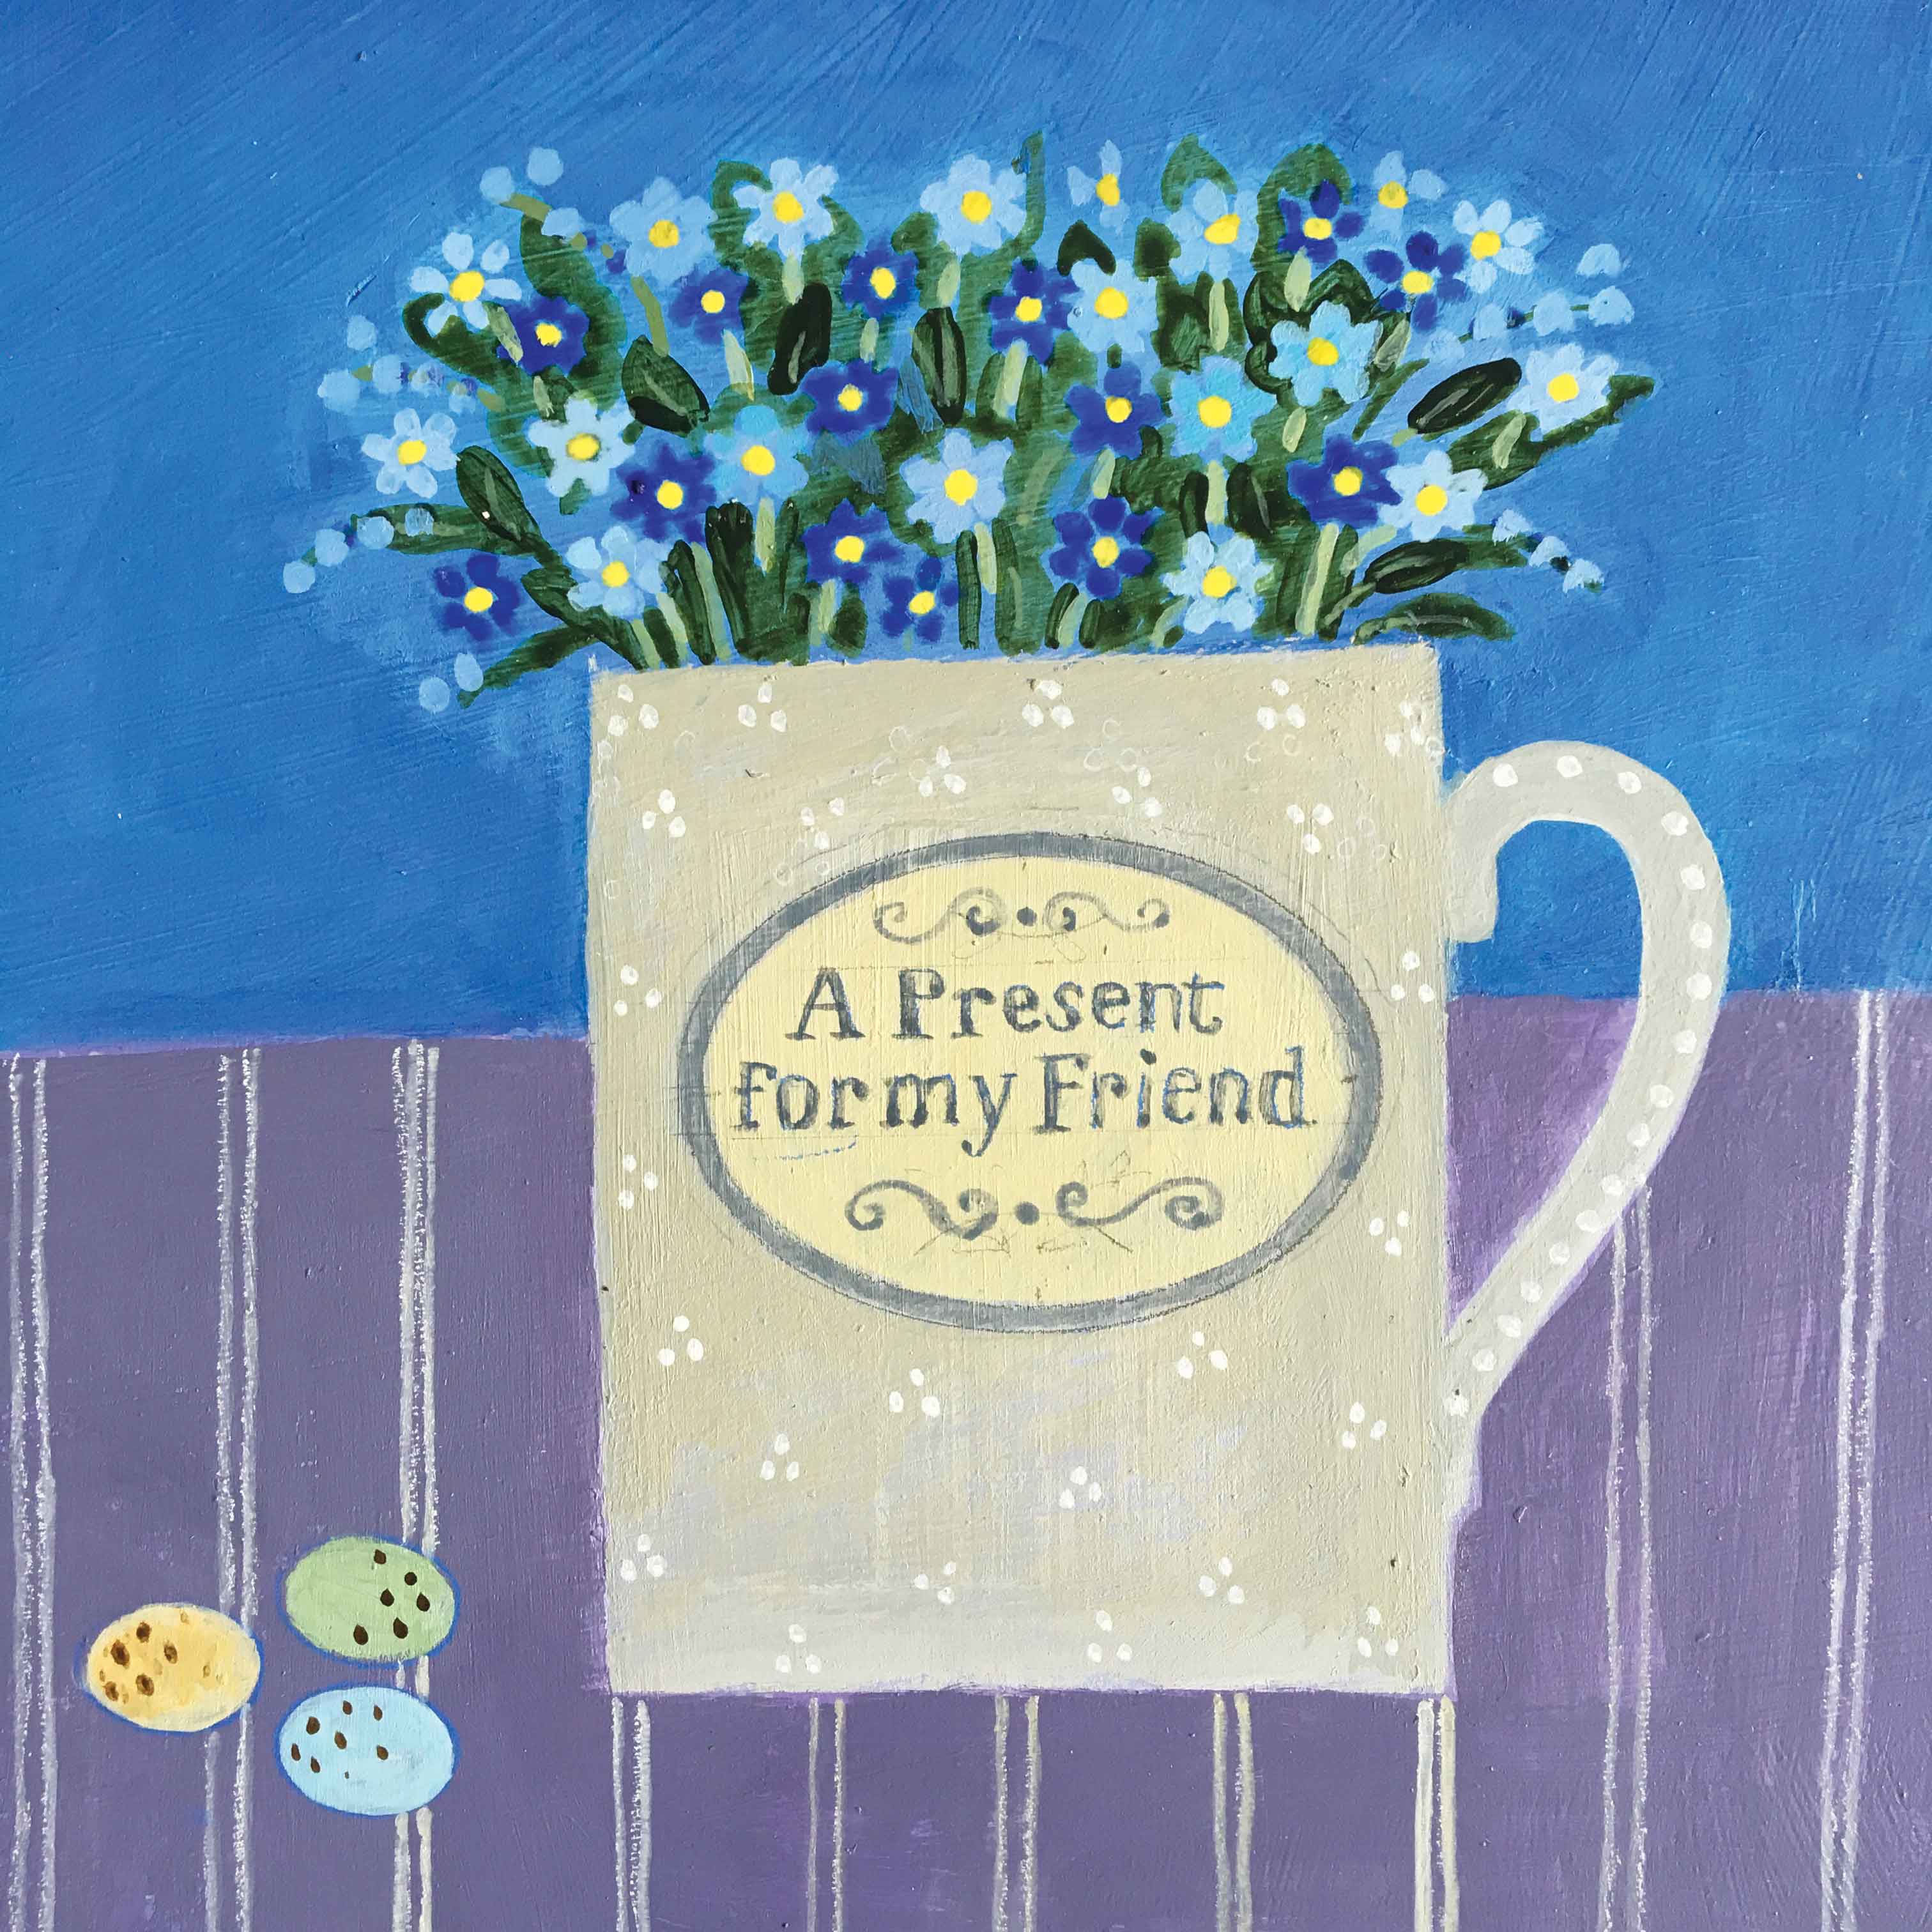 Art Greeting Card by Jill Leman, Acrylic painting, Forget-me-nots in a cup